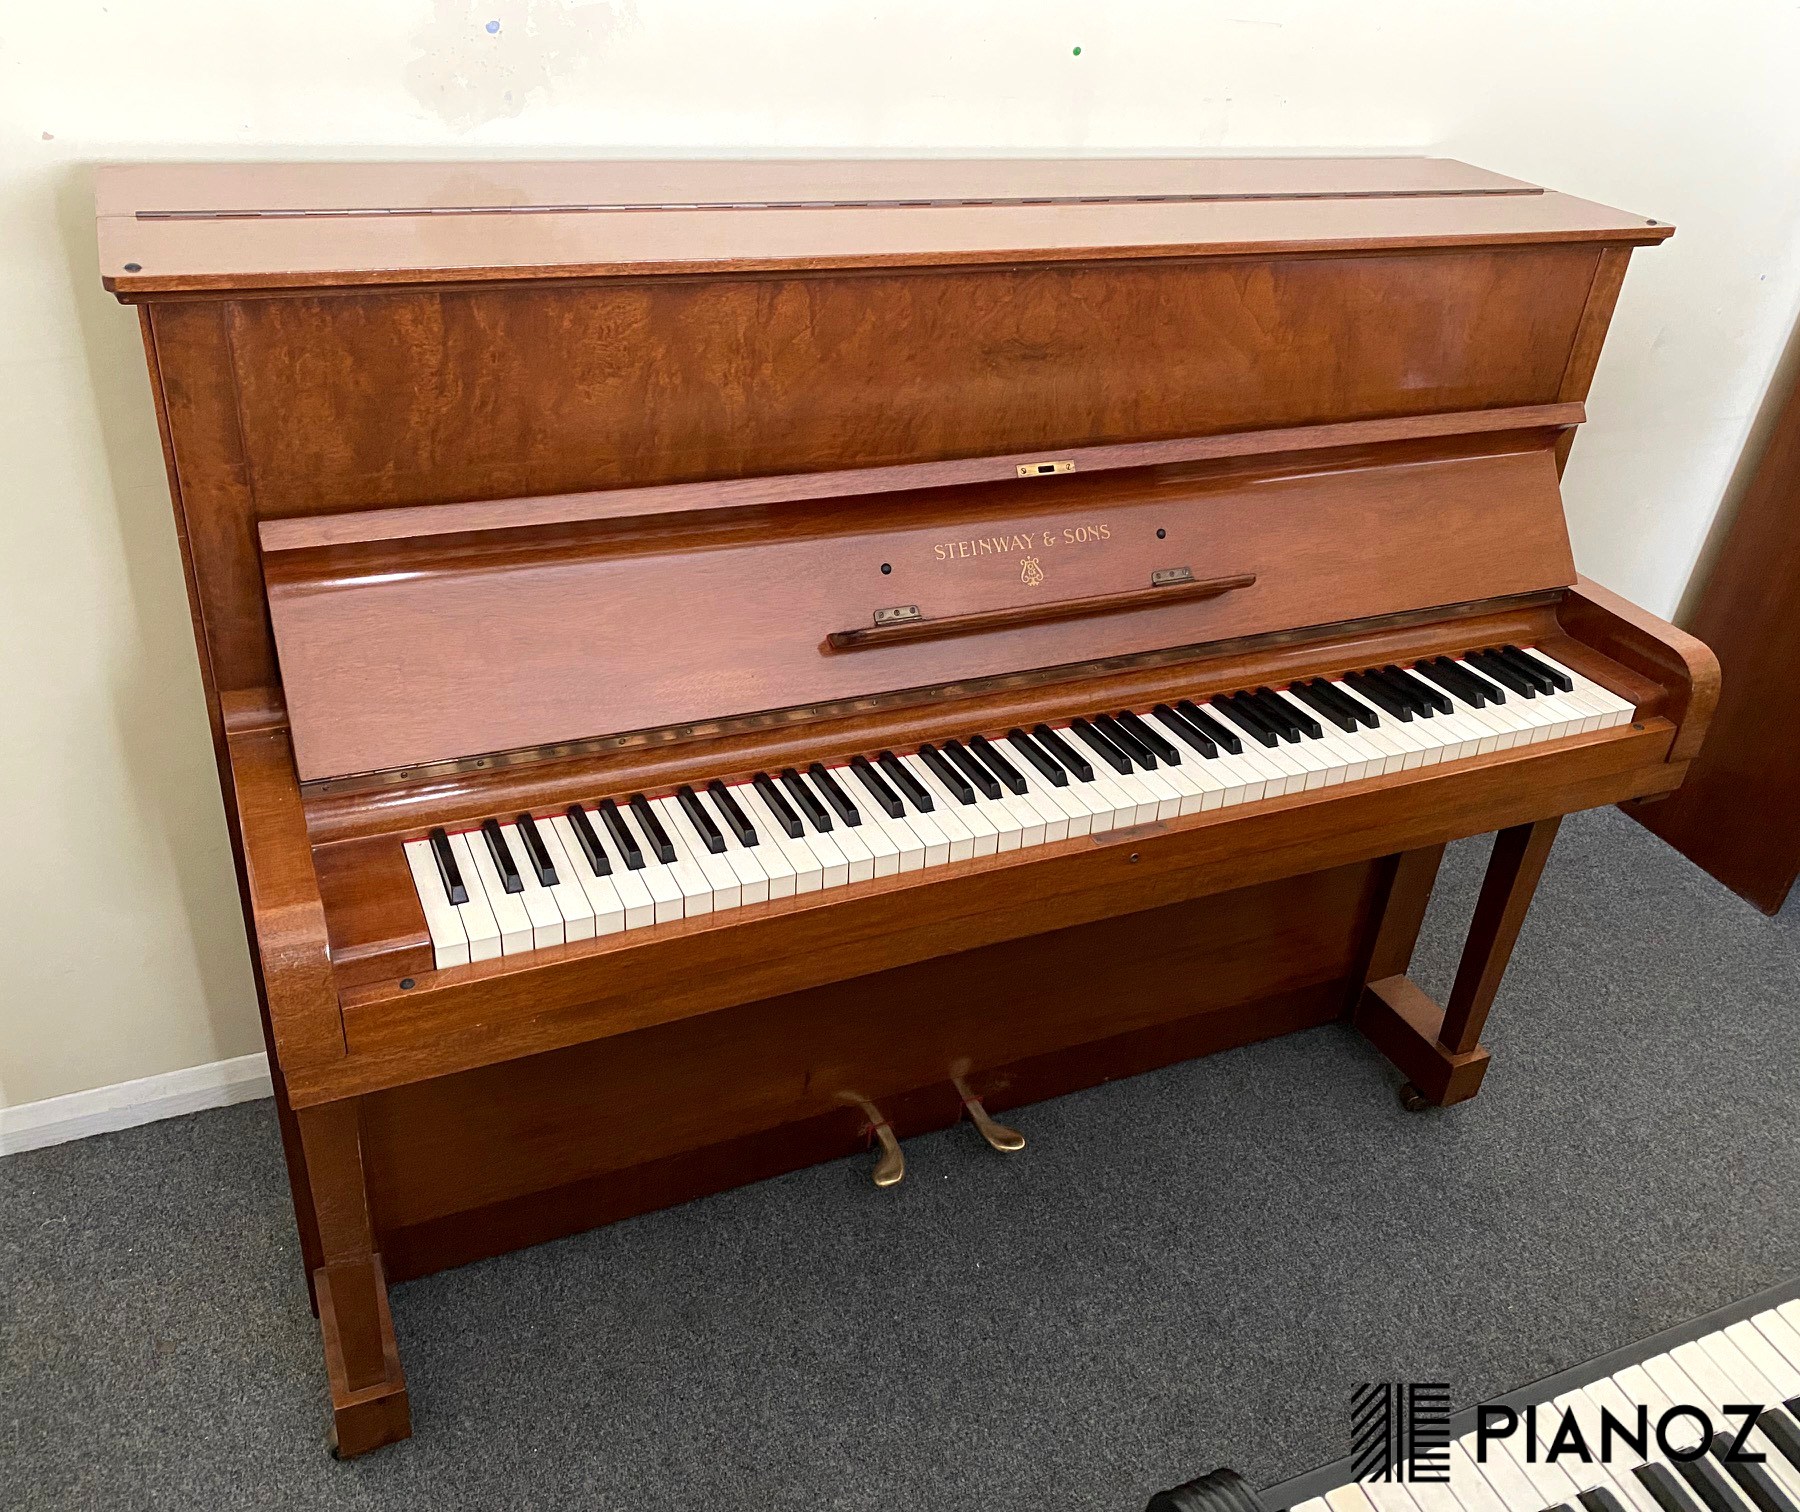 Steinway & Sons Model Z 1938 Upright Piano piano for sale in UK